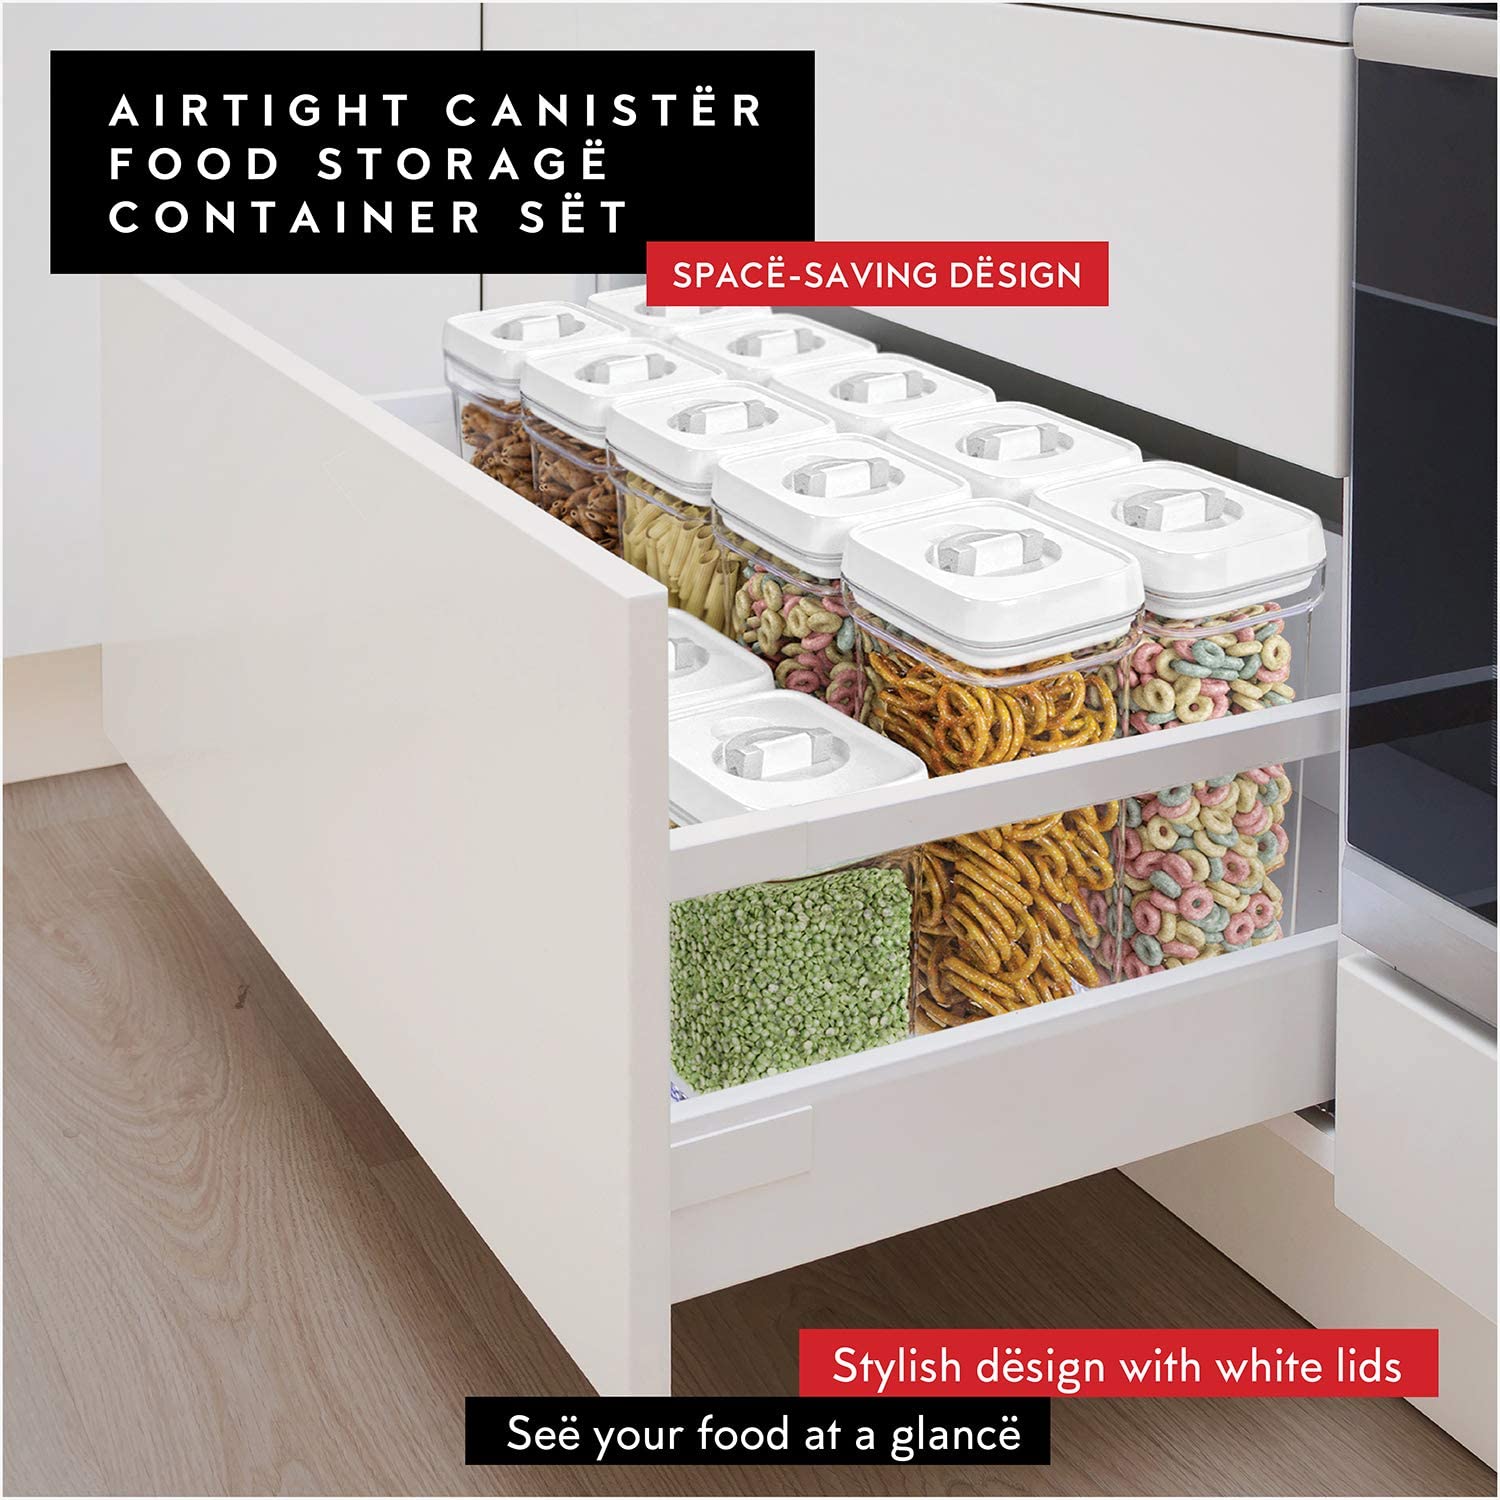 gereen dwllza kitchen airtight food storage containers with lids - 6 piece  set/all same size - air tight snacks pantry & kitchen conta